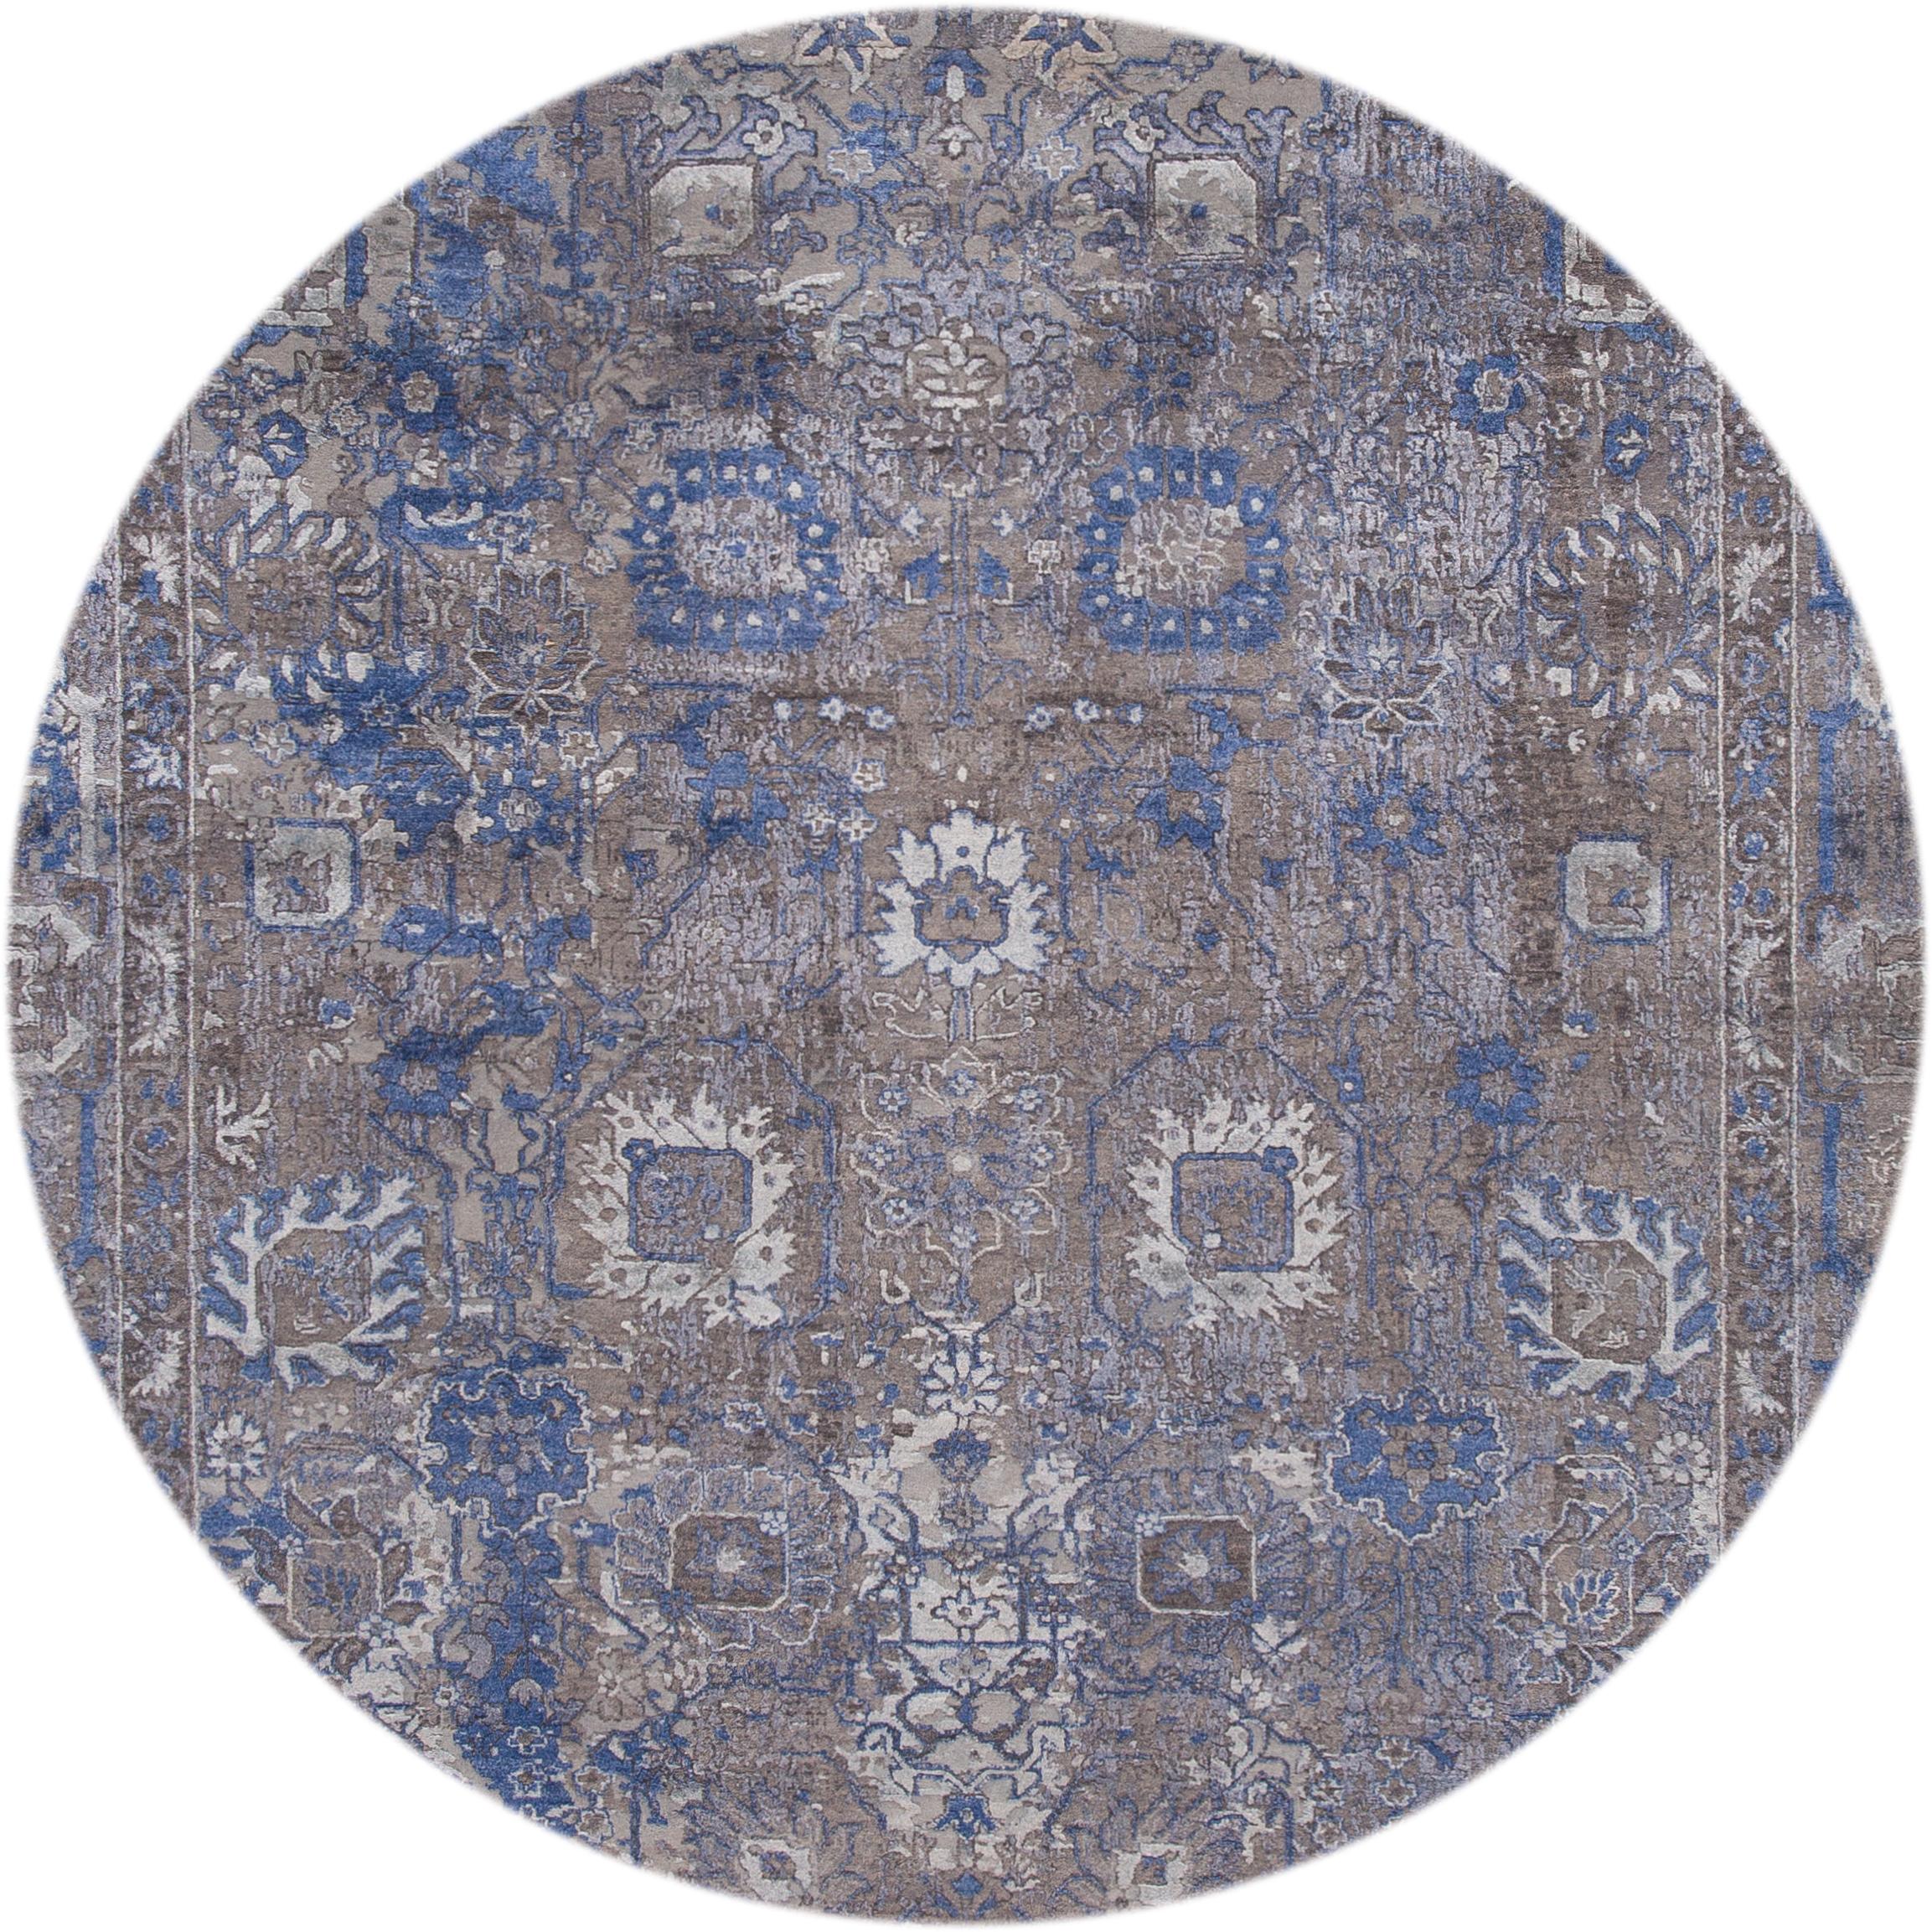 Beautiful contemporary Indian, hand knotted wool and silk in a gray field, ivory and blue accents in a Classic motif.
This rug measures 8' 11